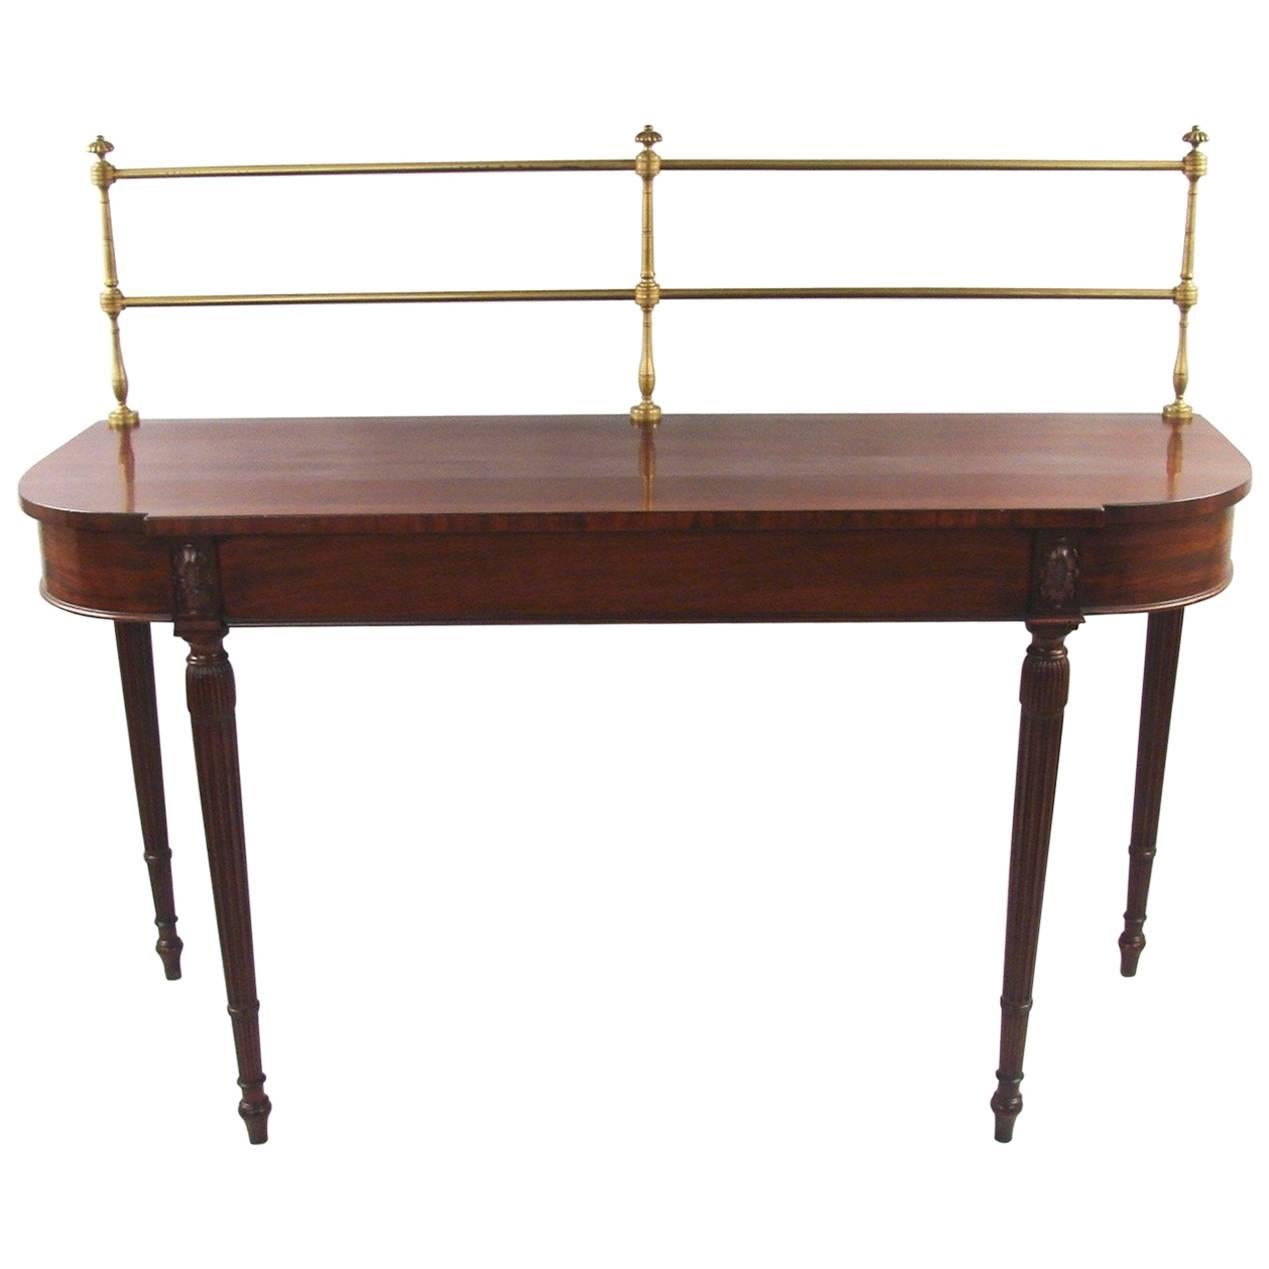 A compact George III period Sheraton design bowfront mahogany server retaining its original brass gallery, the shaped top with curved sides supported on fluted legs headed by well-carved paterae. Circa 1800.